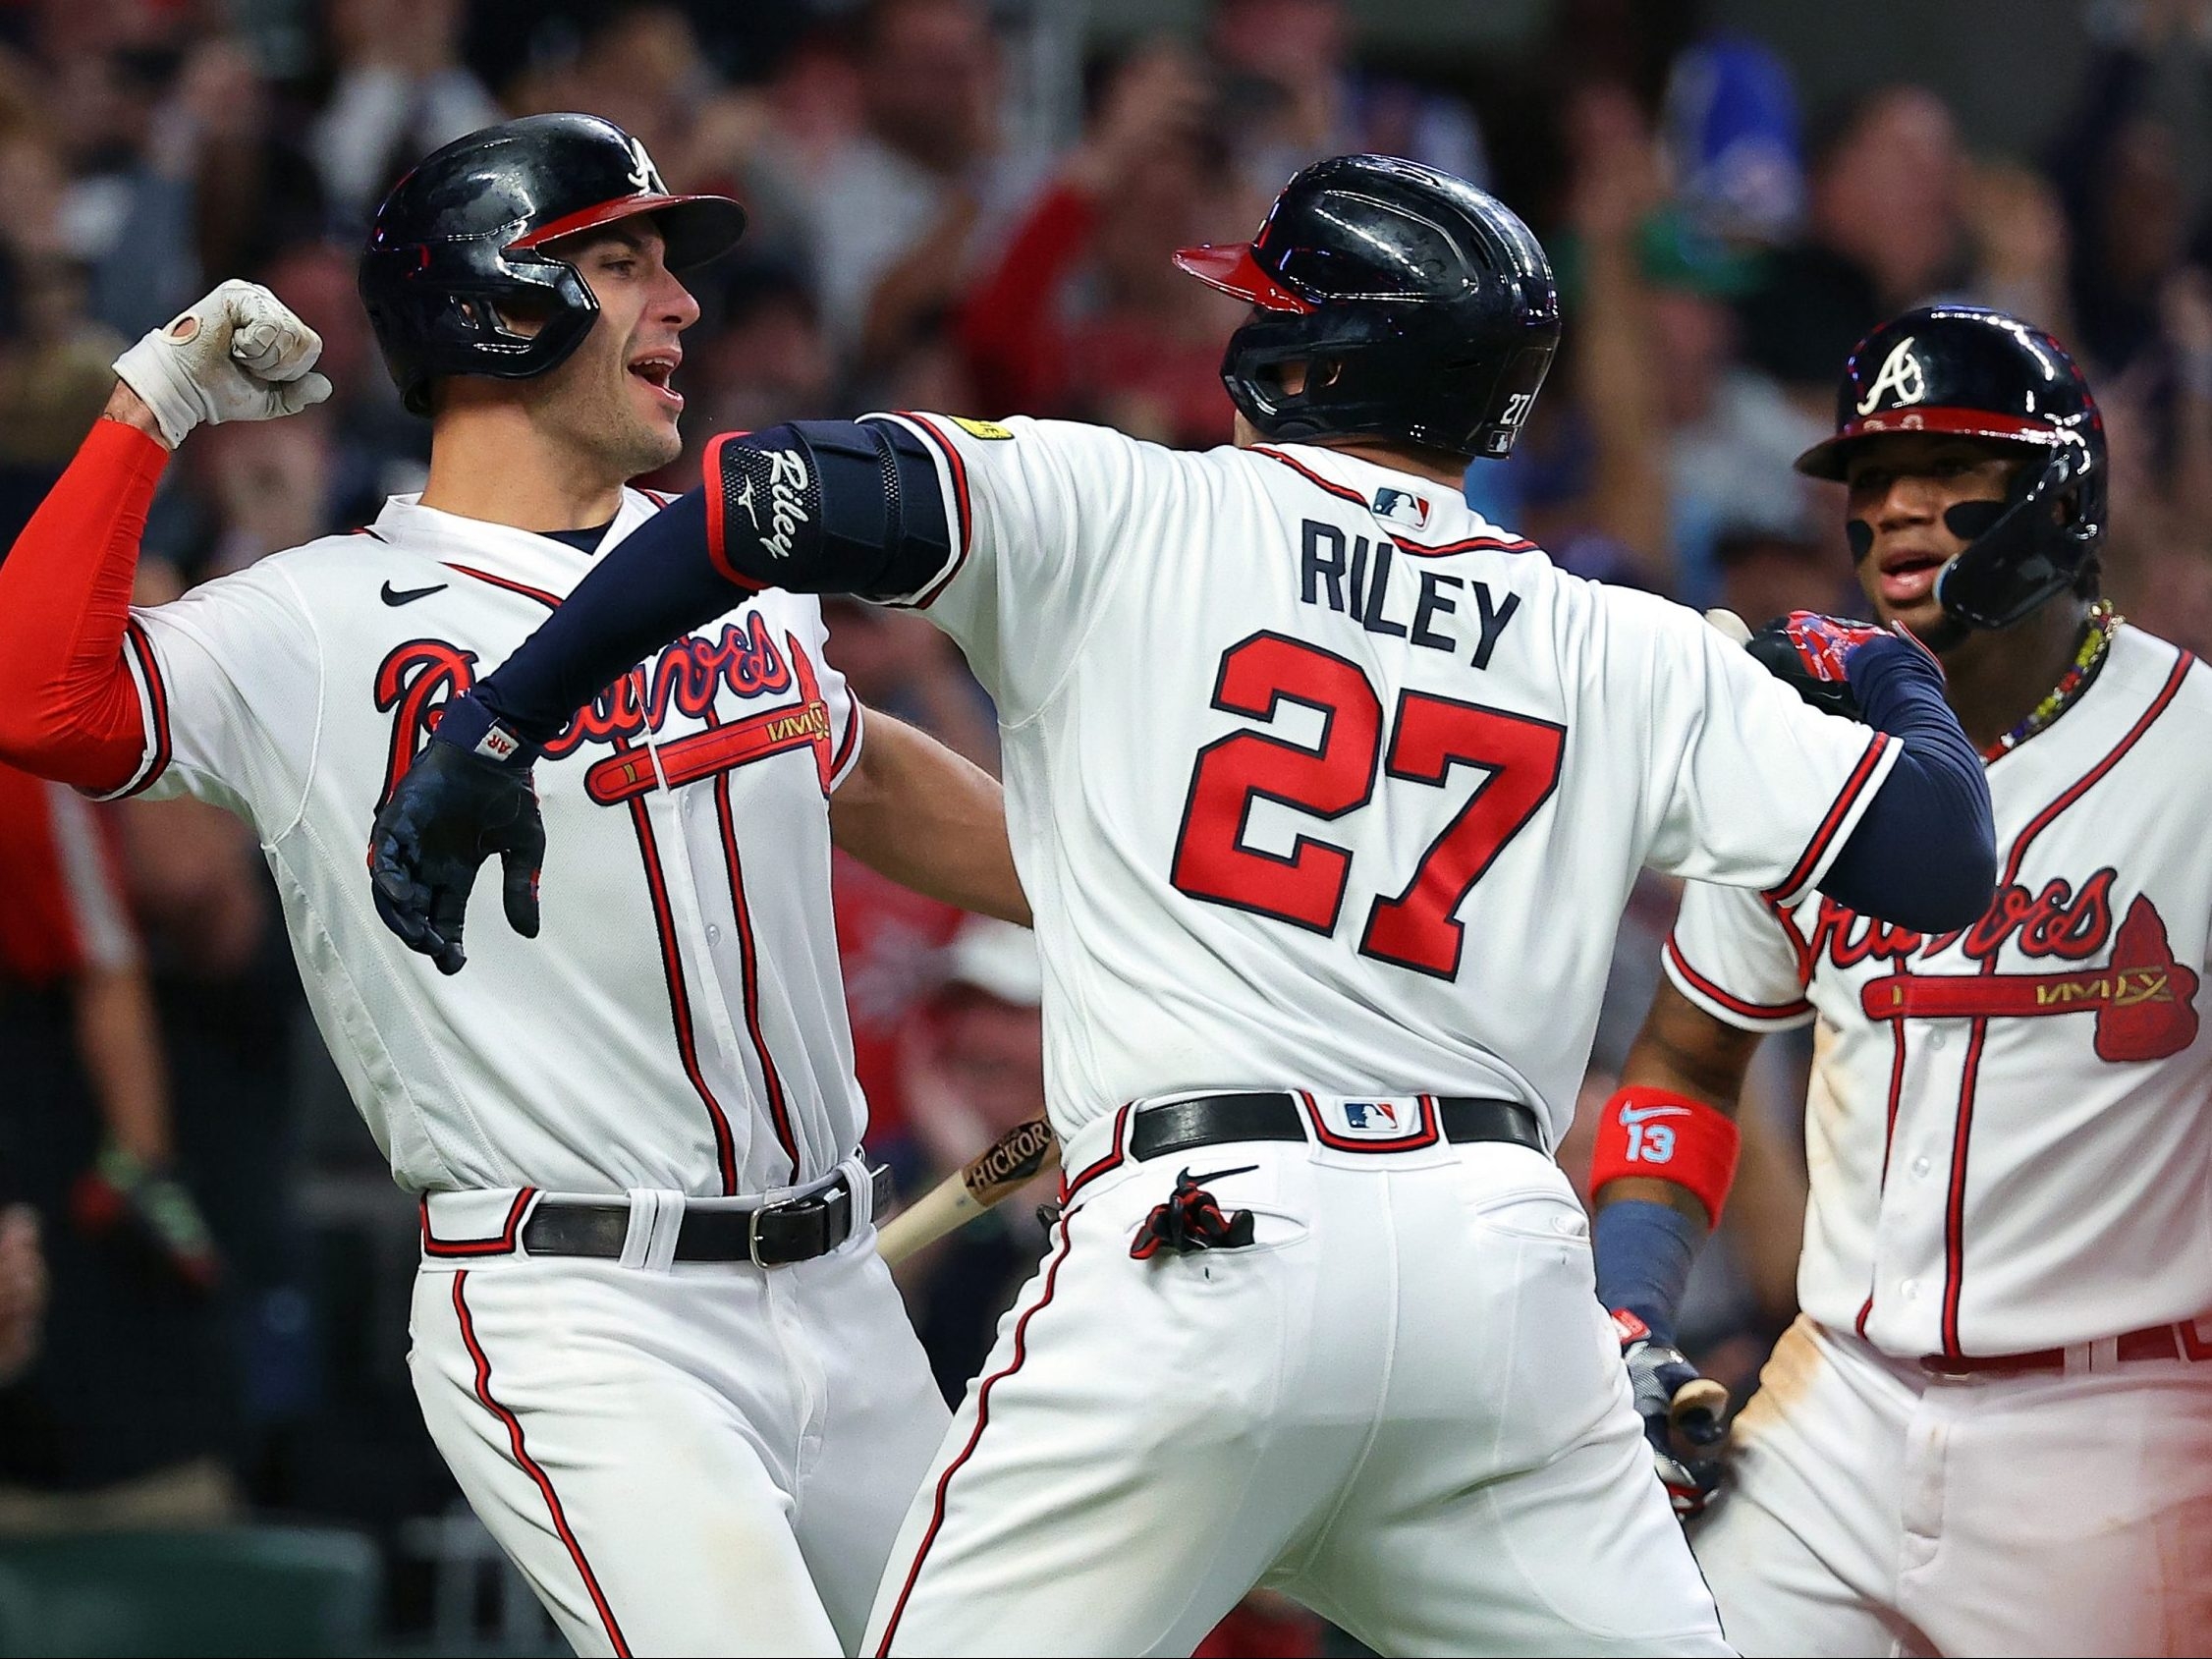 Braves rally past Phillies on d'Arnaud, Riley homers and game